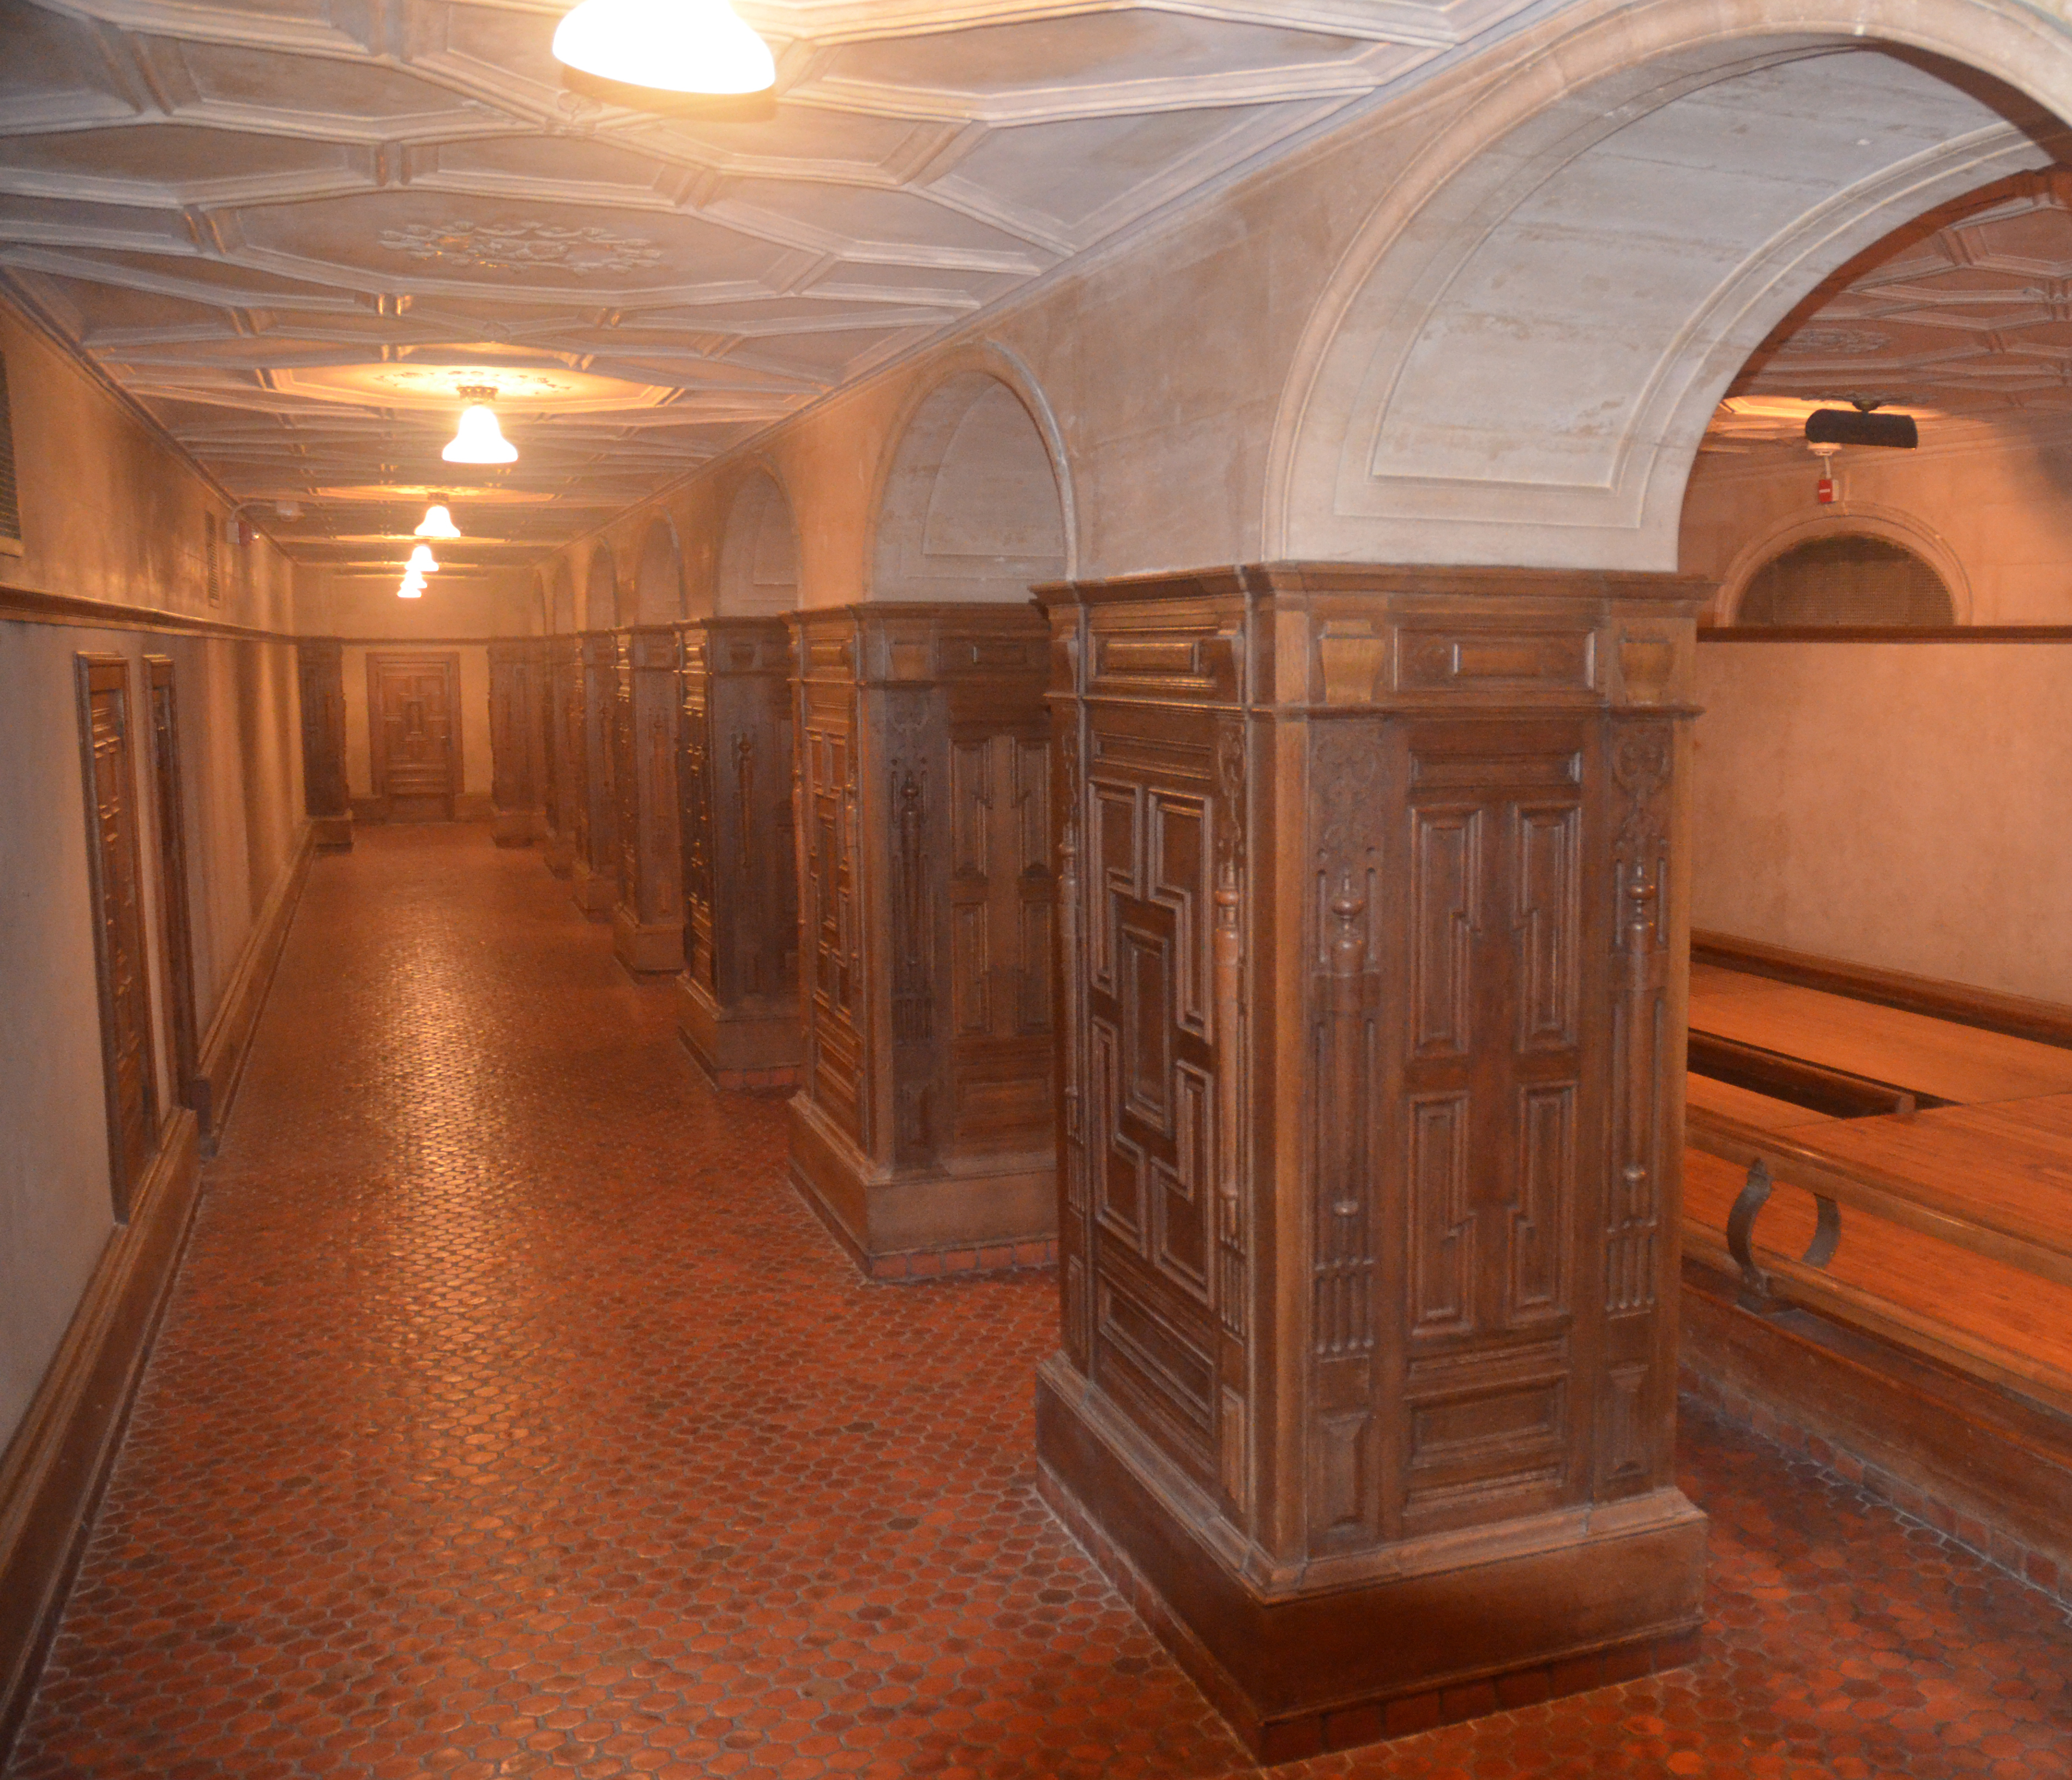 The hallway beside the bowling alley at the Frick Collection as seen in late 2012 (credit: Evan Bindelglass / CBSNewYork)